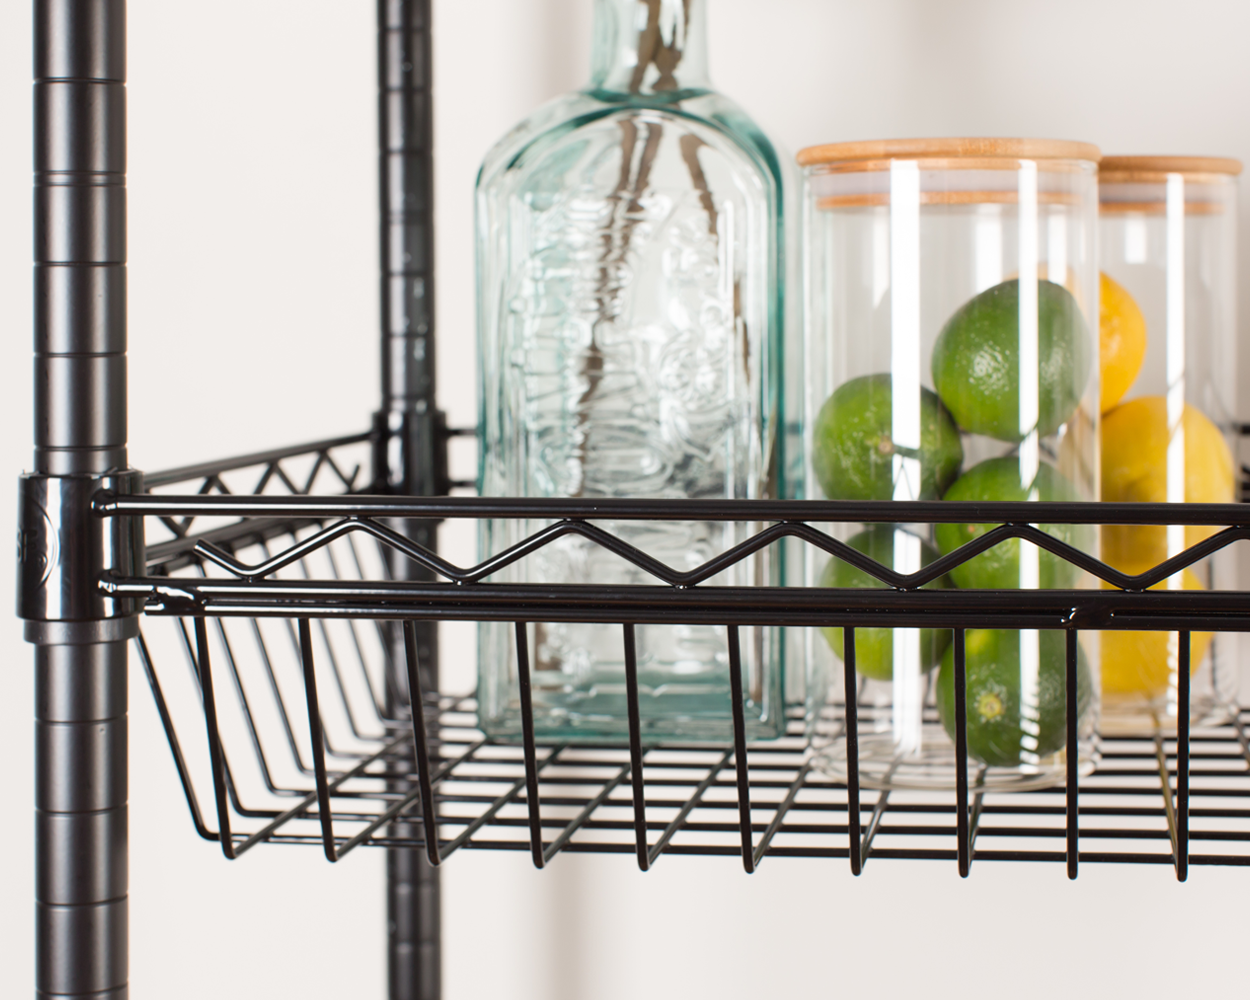 6 Tier Basket Wire Shelving Units